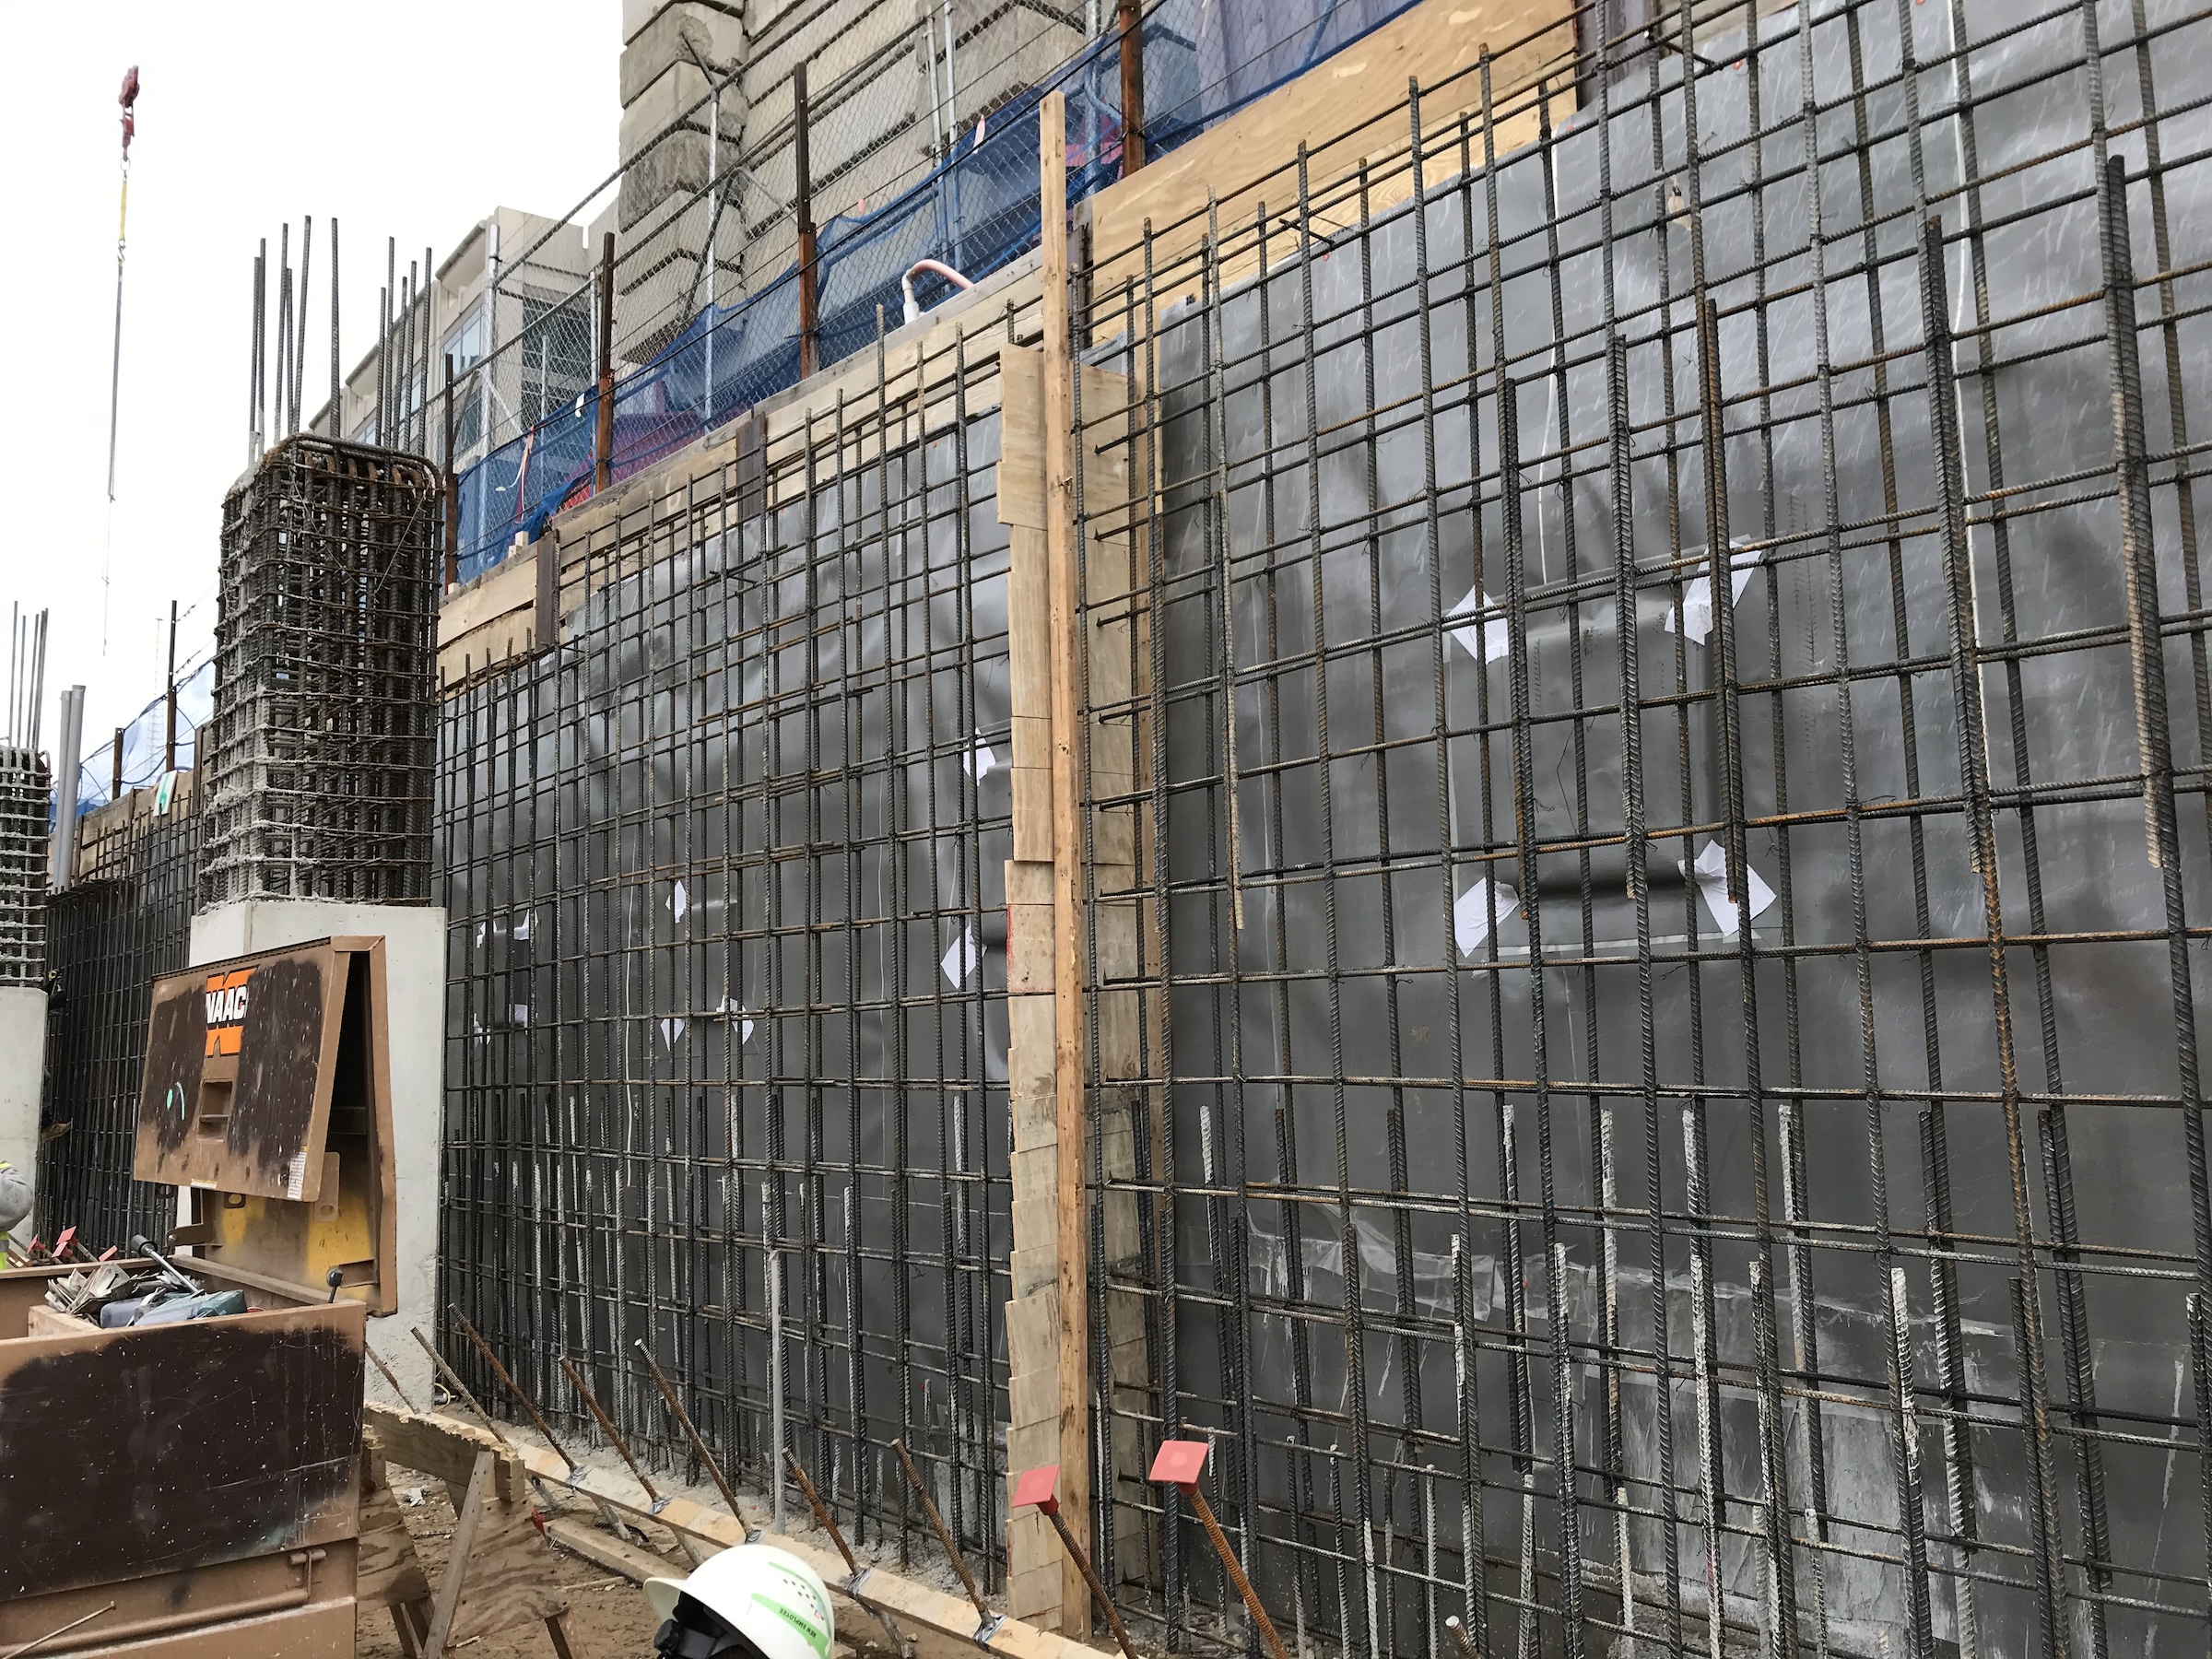 Pre-applied blindside waterproofing installed prior to pouring of concrete wall. Photo courtesy Walter P Moore